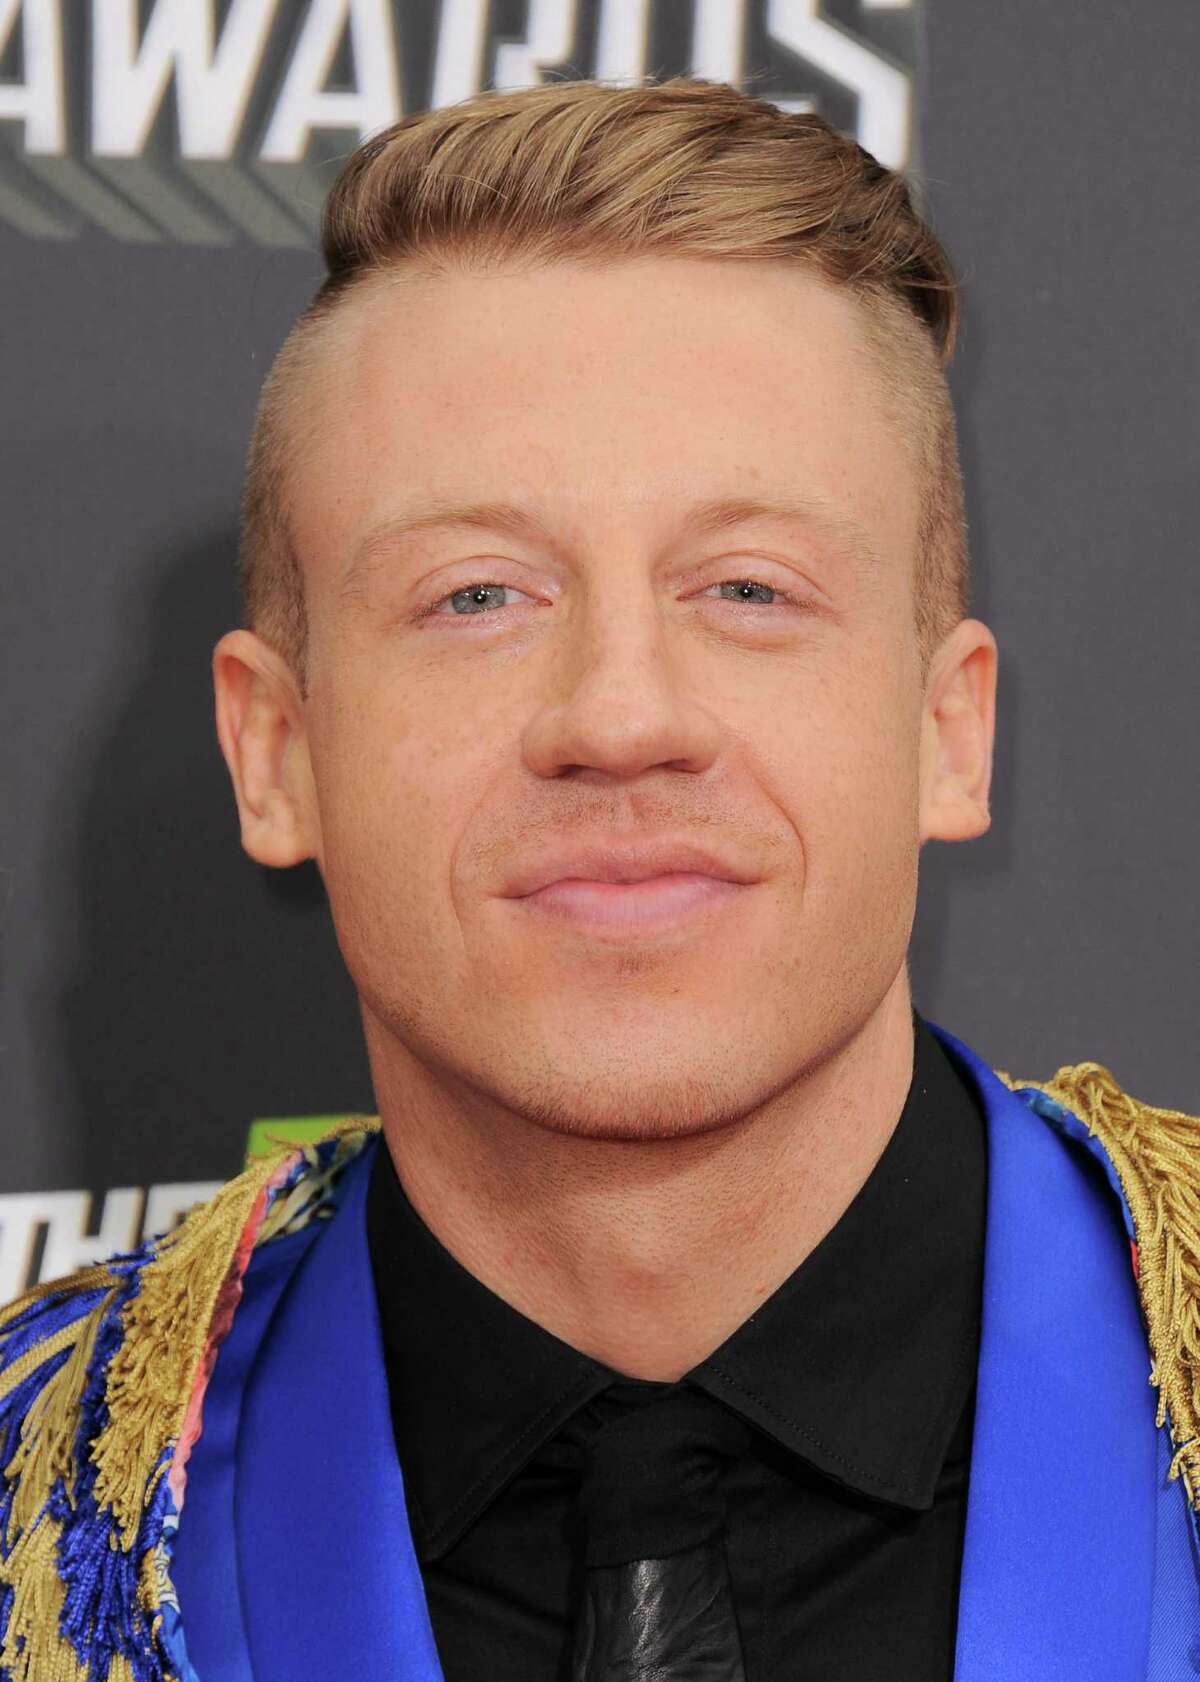 Macklemore arrives at the MTV Movie Awards in Sony Pictures Studio Lot in Culver City, Calif., on Sunday April 14, 2013. (Photo by Jordan Strauss/Invision/AP)